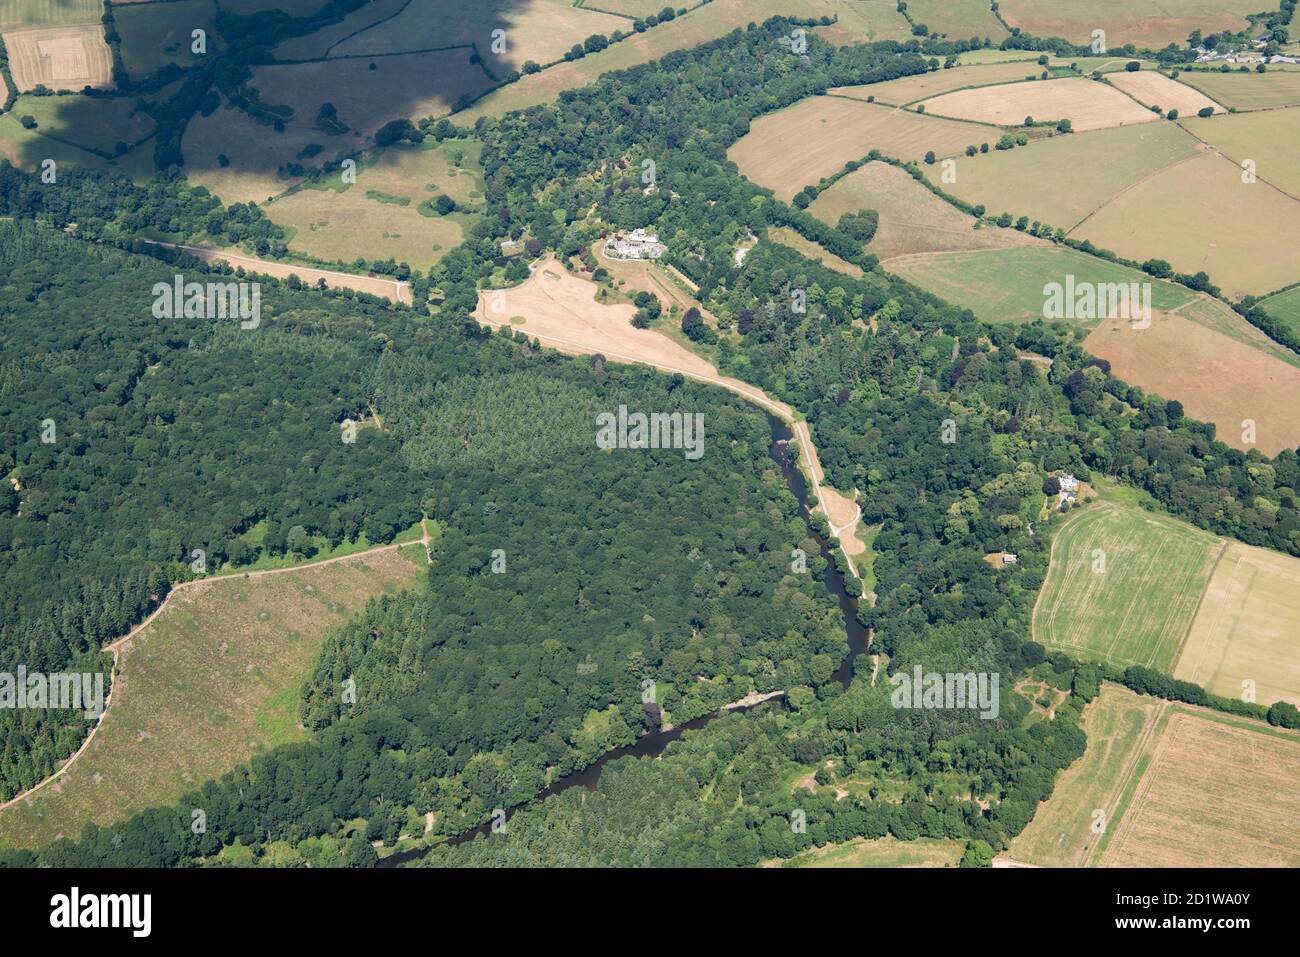 Milton Abbot, Devon. Landscape park and wood designed by Humphry Repton at Endsleigh House, now a hotel, near Milton Abbot, Devon. Aerial view. Stock Photo